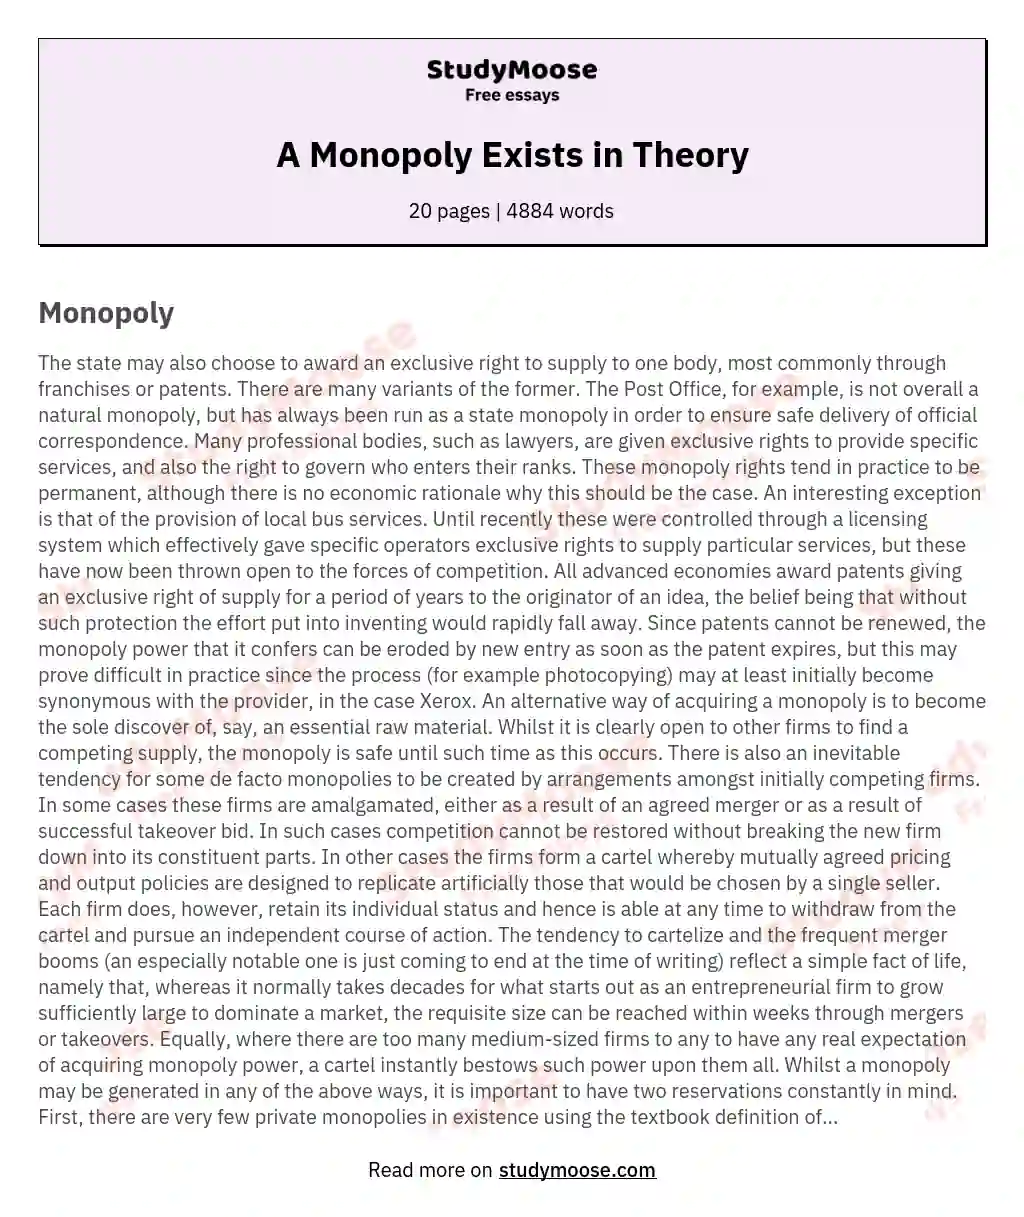 A Monopoly Exists in Theory essay